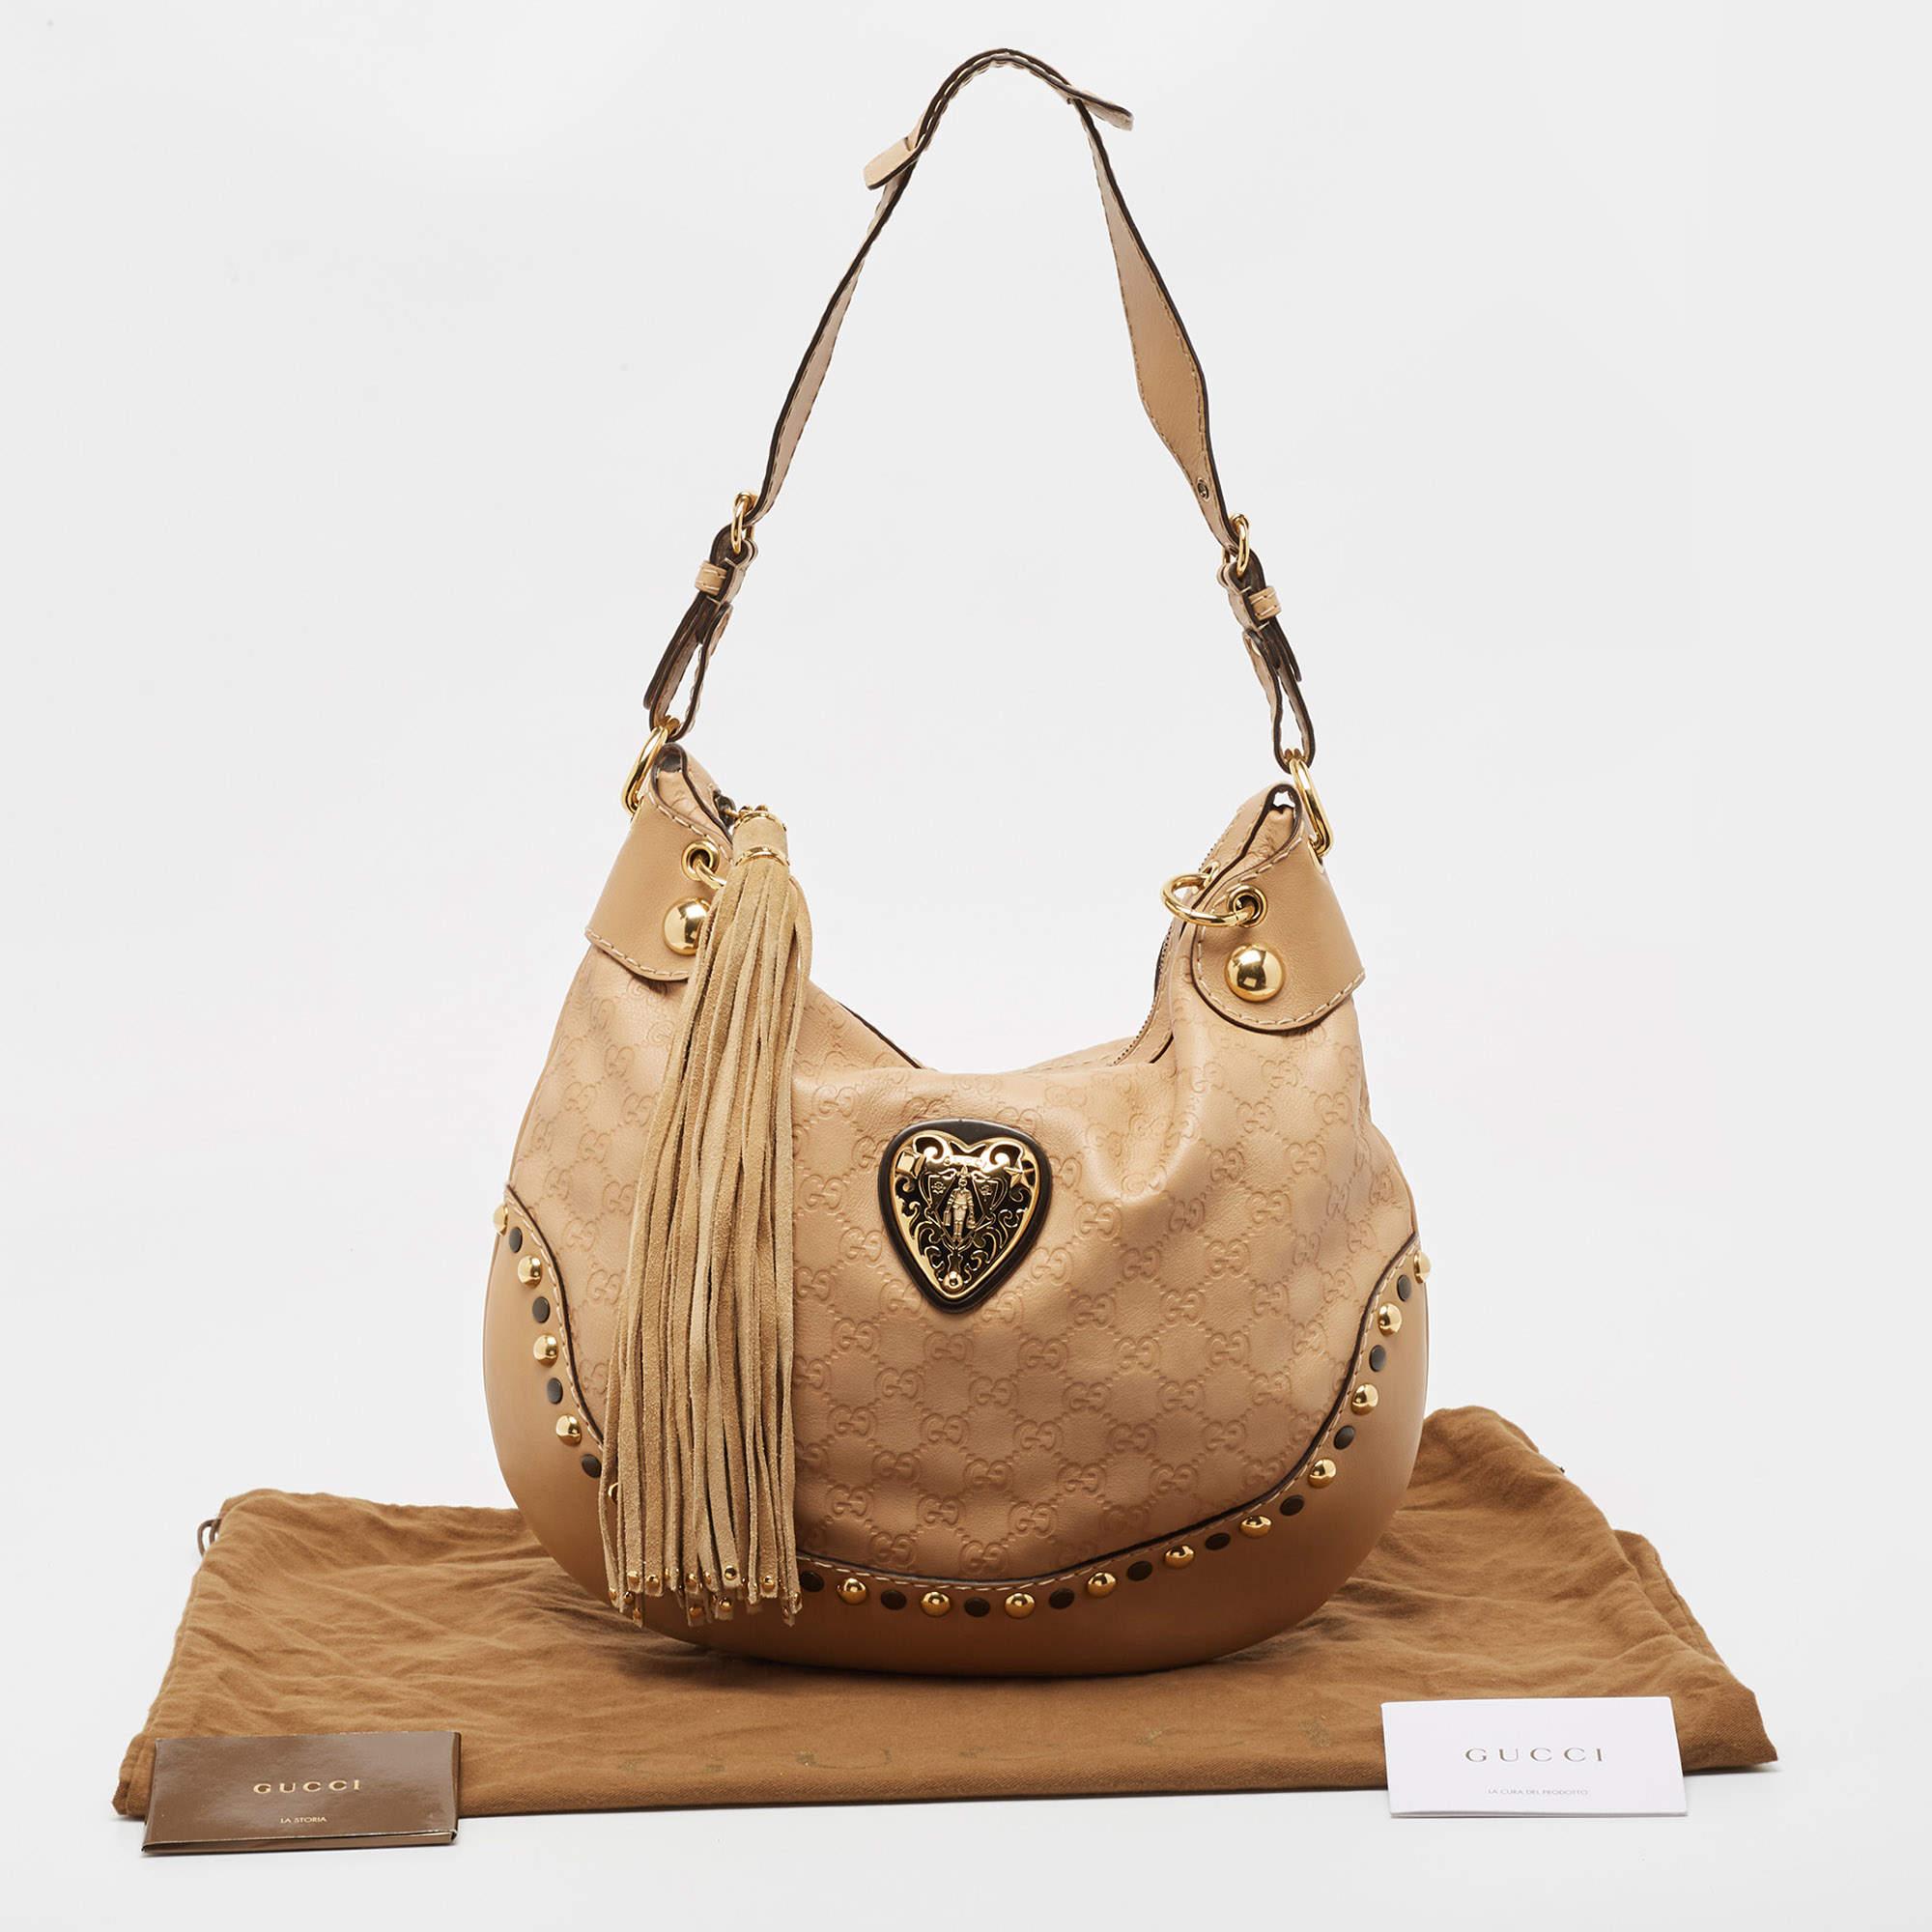 This Gucci Babouska Heart hobo creation might just become the most loved classic bag in your closet. Crafted from Guccissima leather, it has gold-tone metal accents and the signature tassel detail. The bag is equipped with a single handle and a